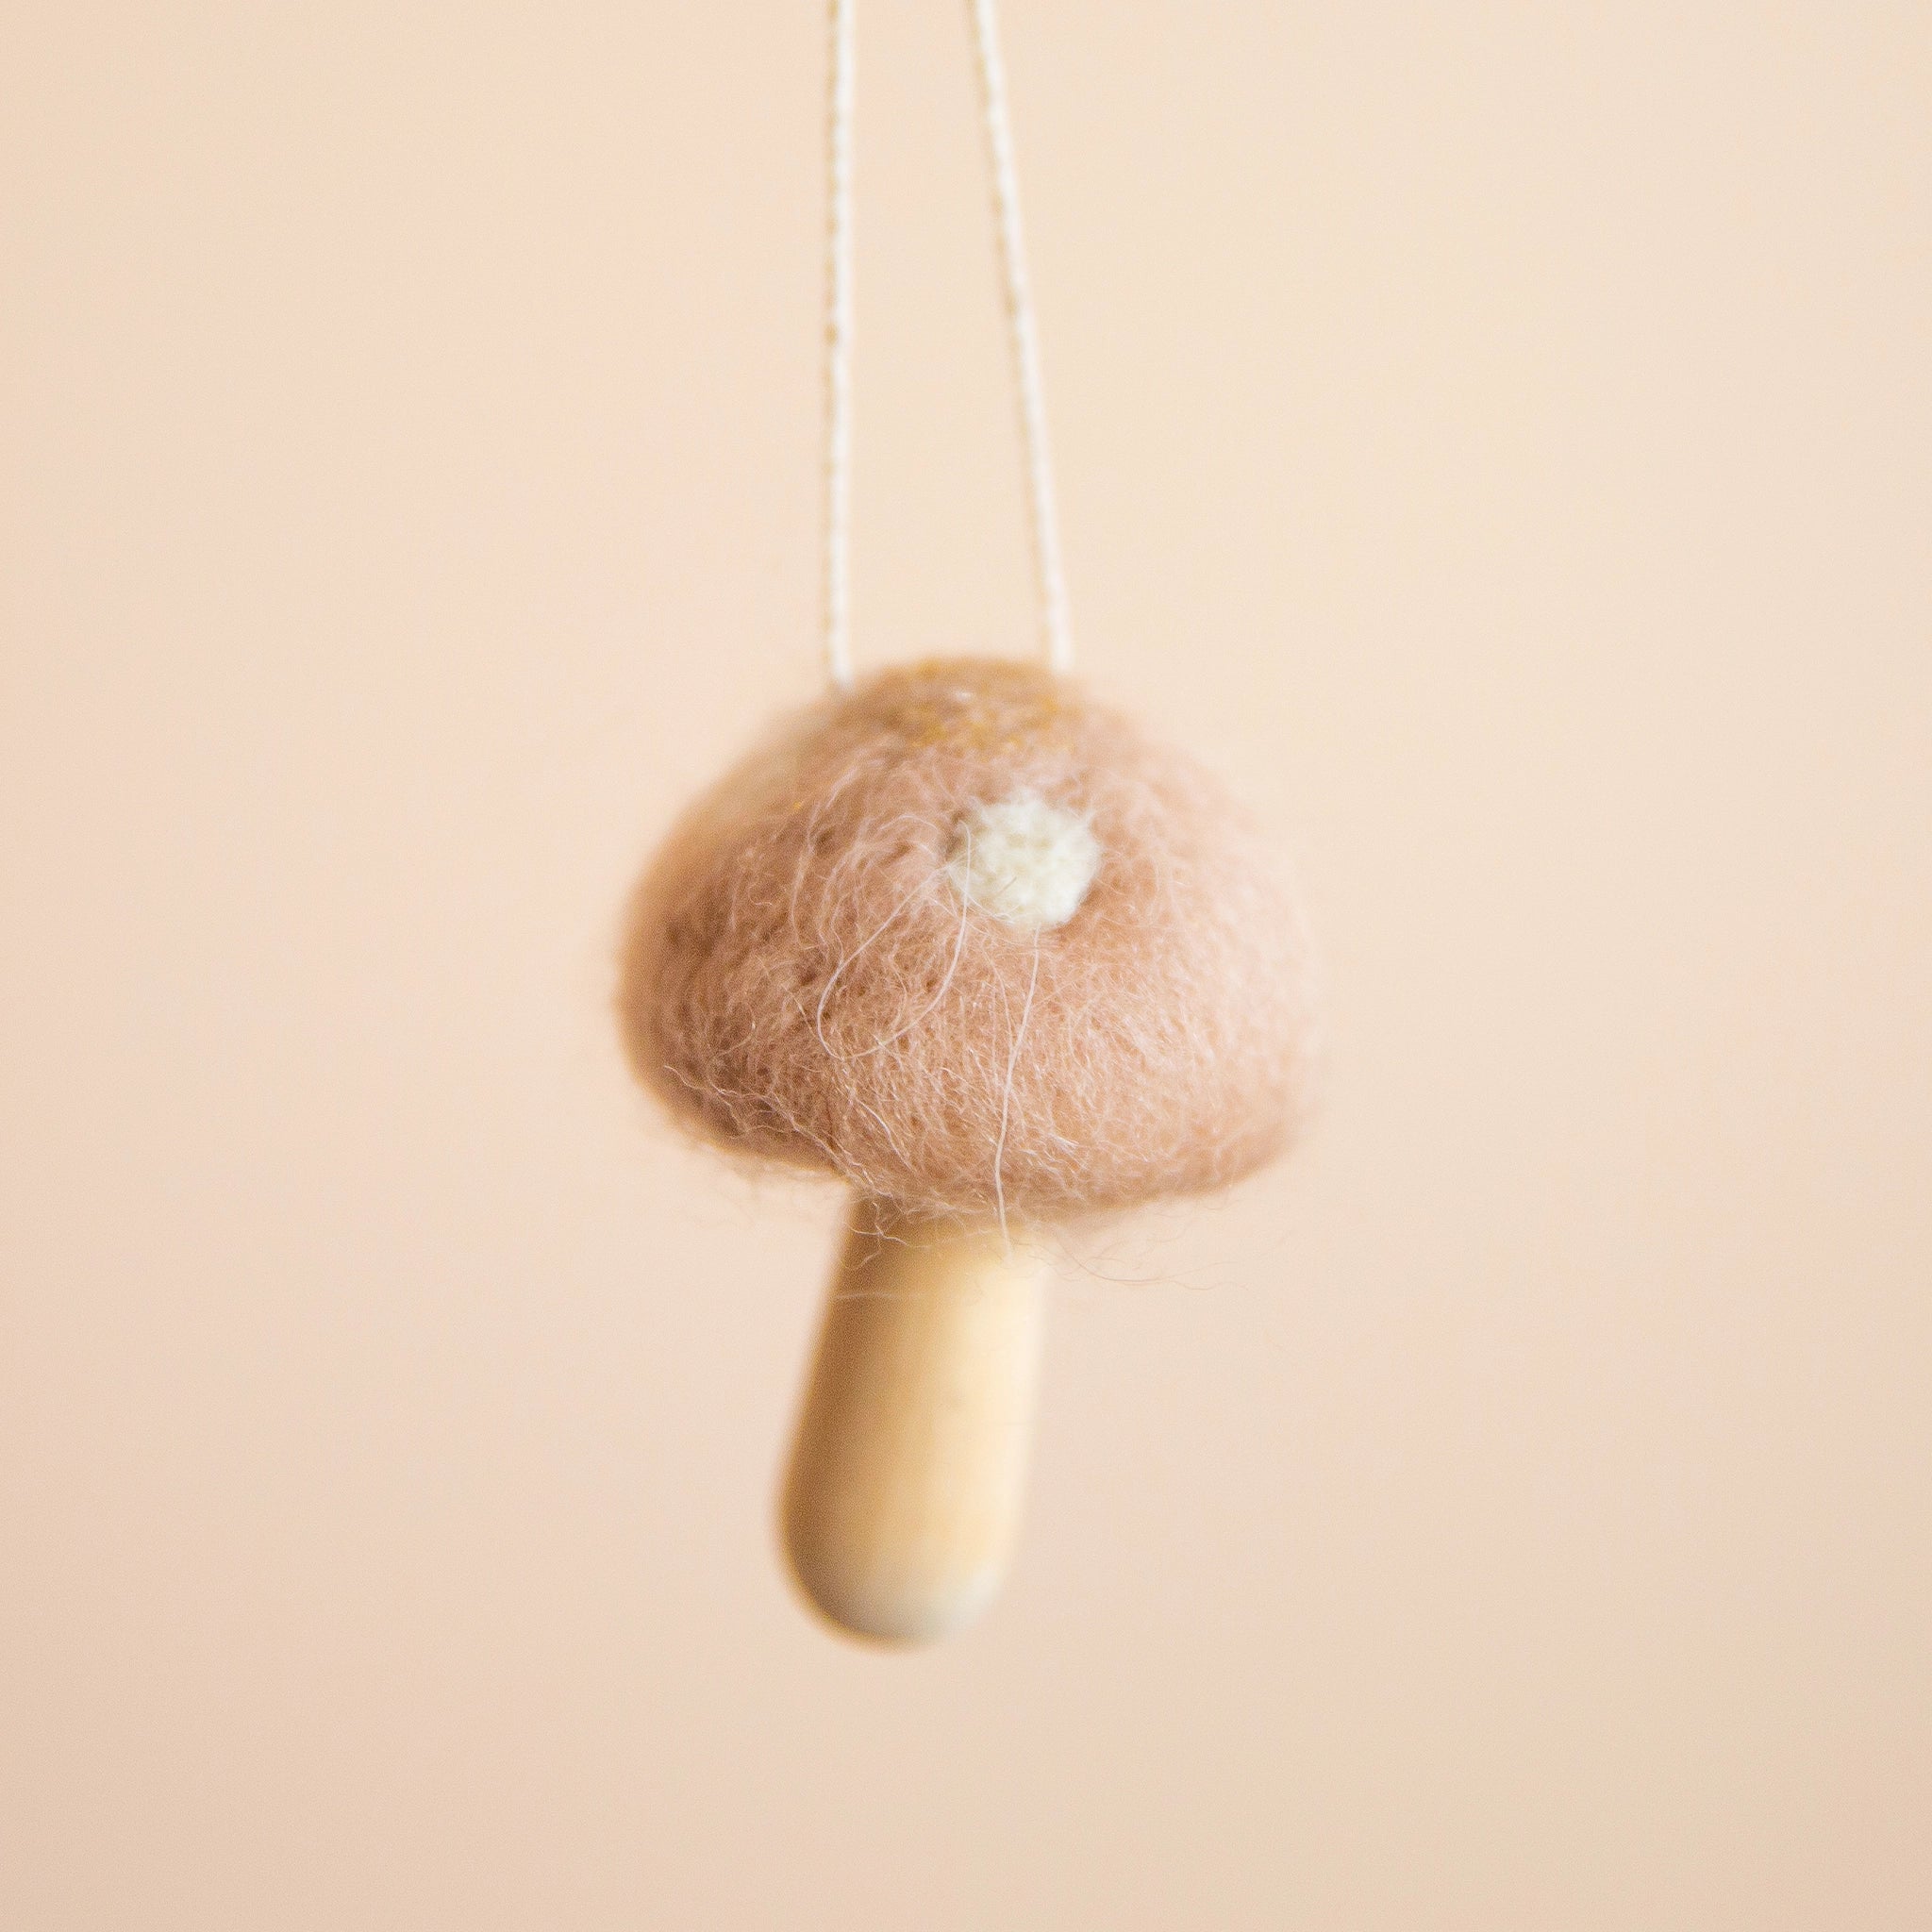 A mauve mushroom ornament with white spots and a light wooden stem.